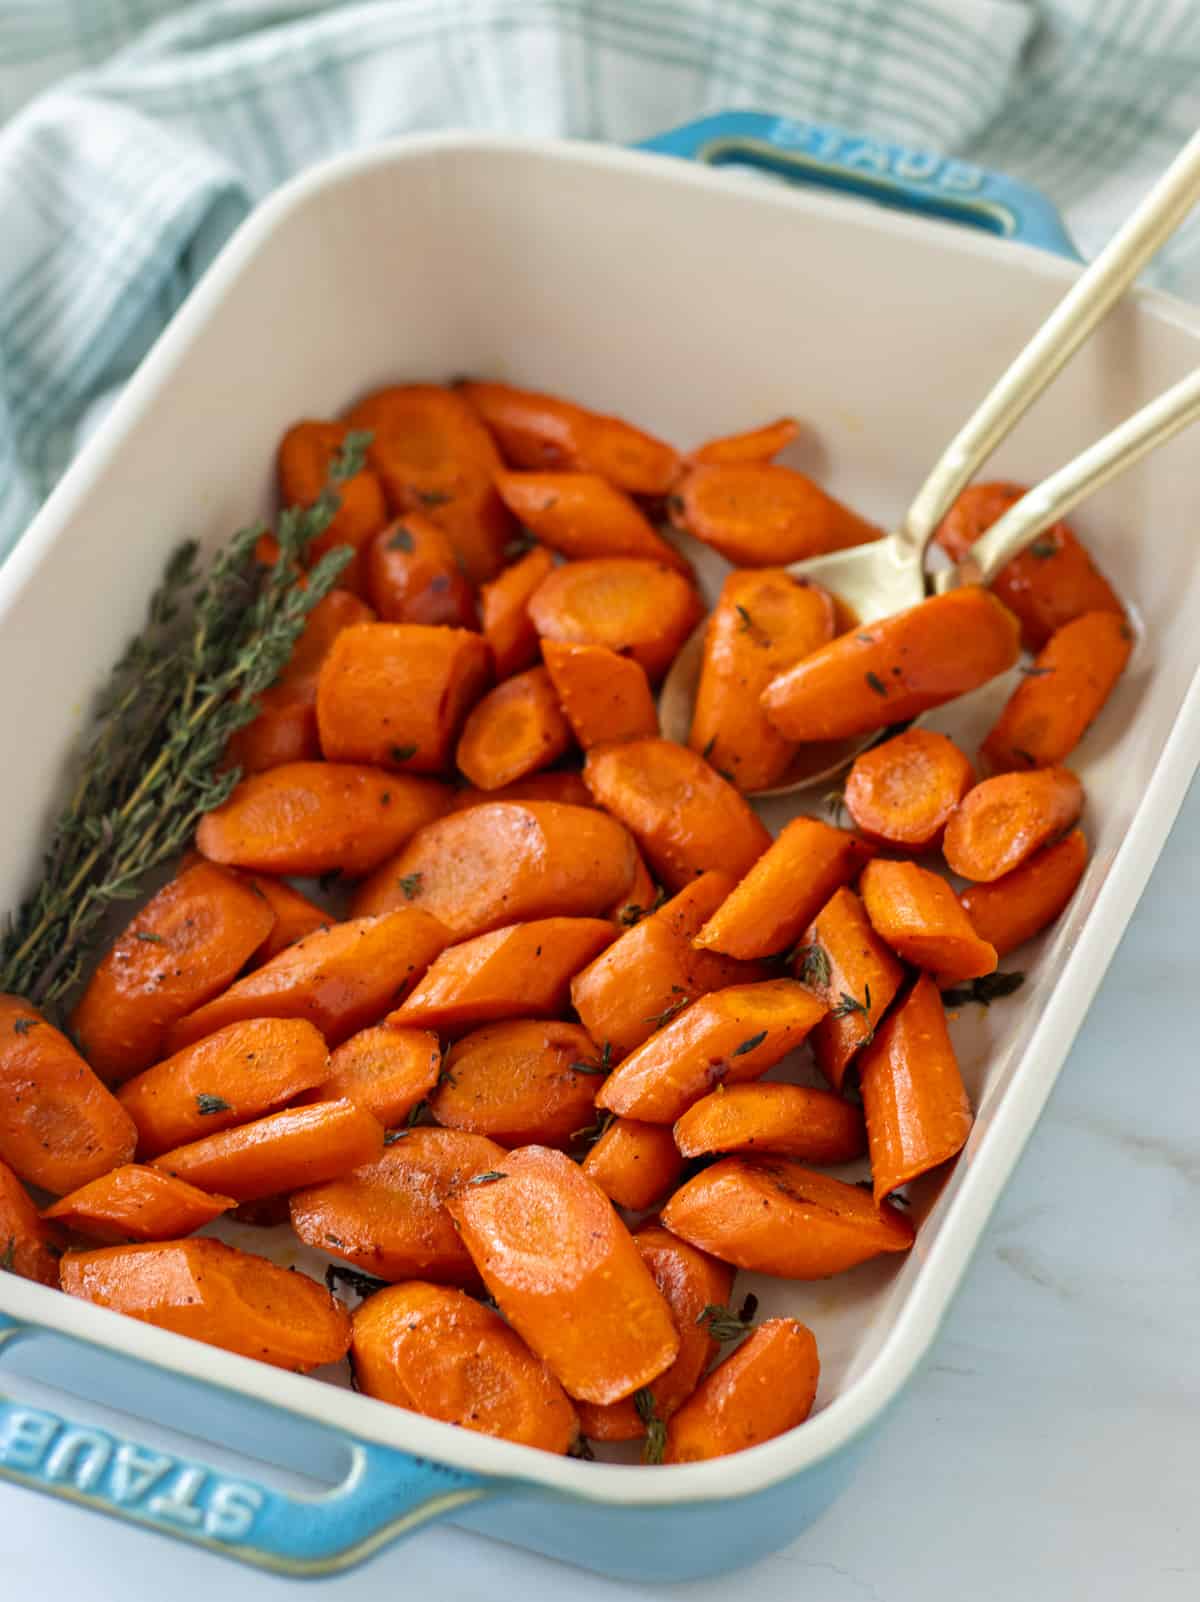 Roasted carrot slices in a baking dish with two large spoons and fresh thyme.